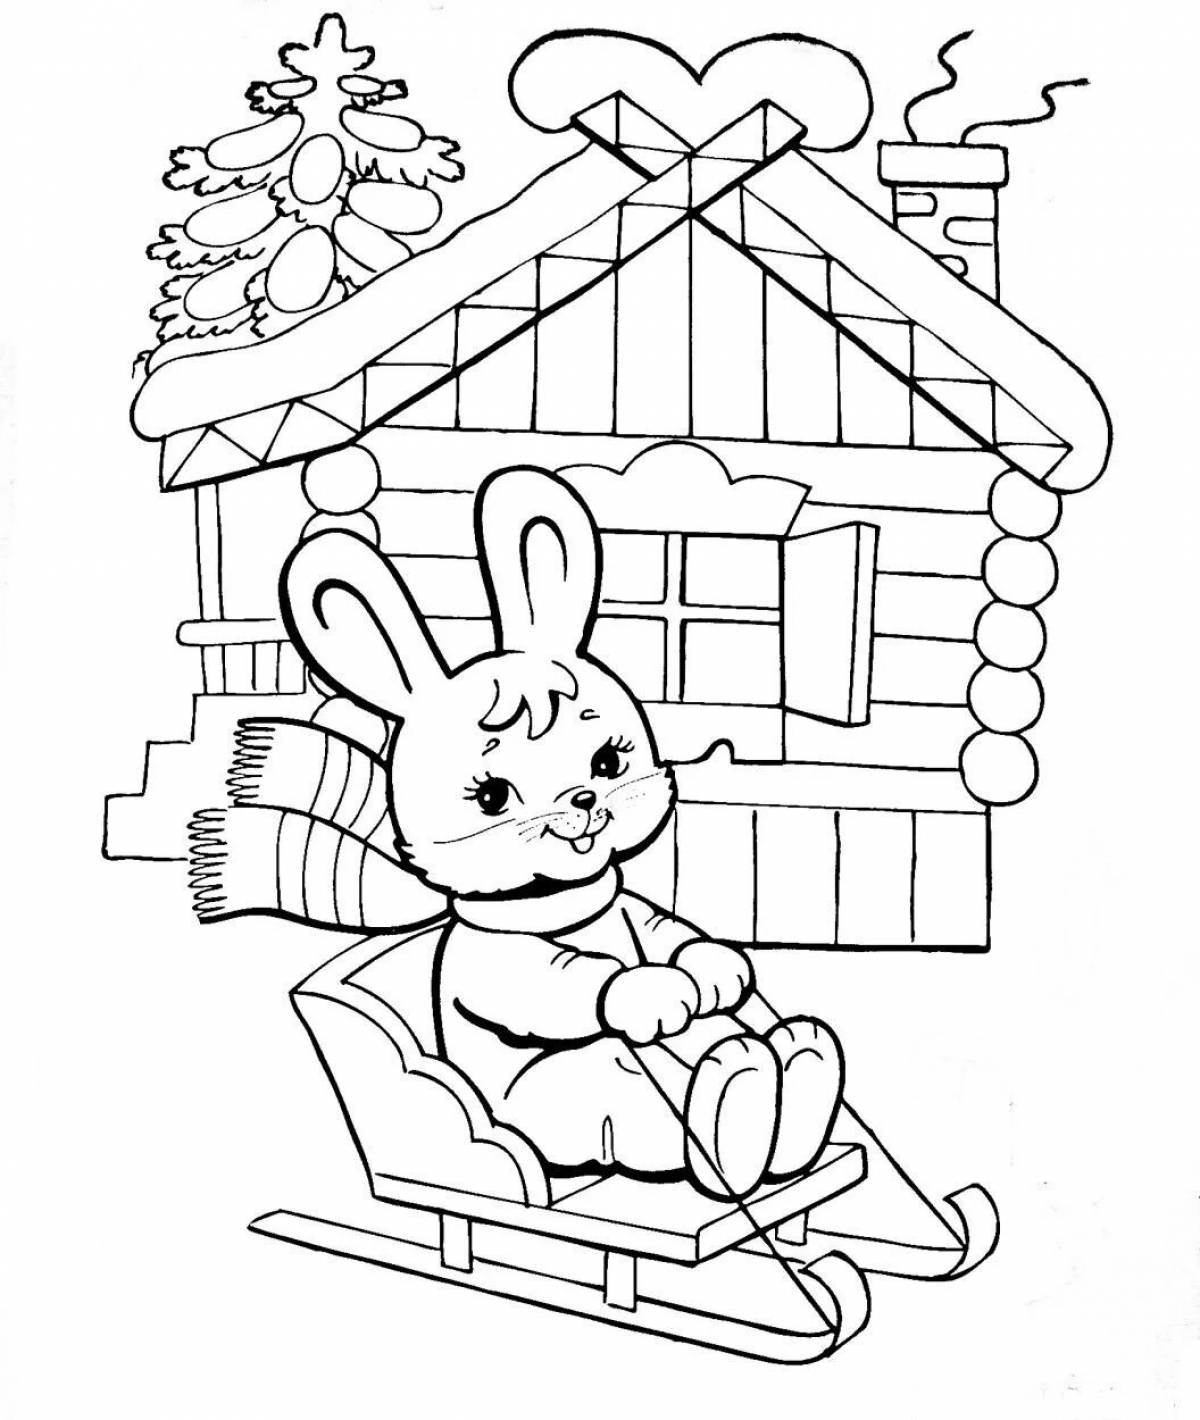 Zayushkina's hut coloring page in color